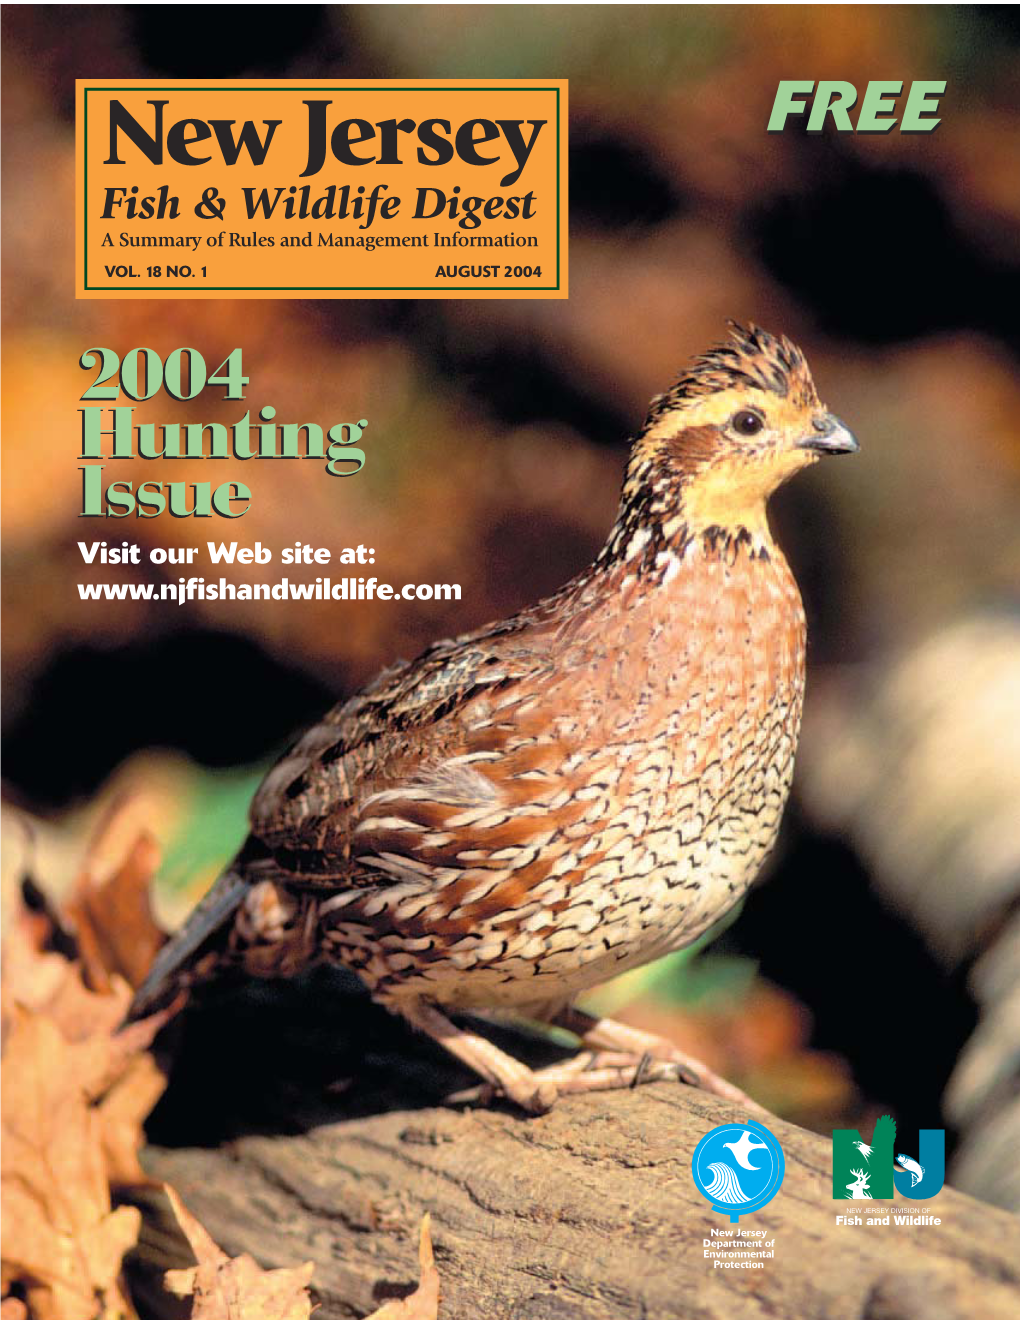 Complete 2004 Hunting Issue of the Fish and Wildlife DIGEST